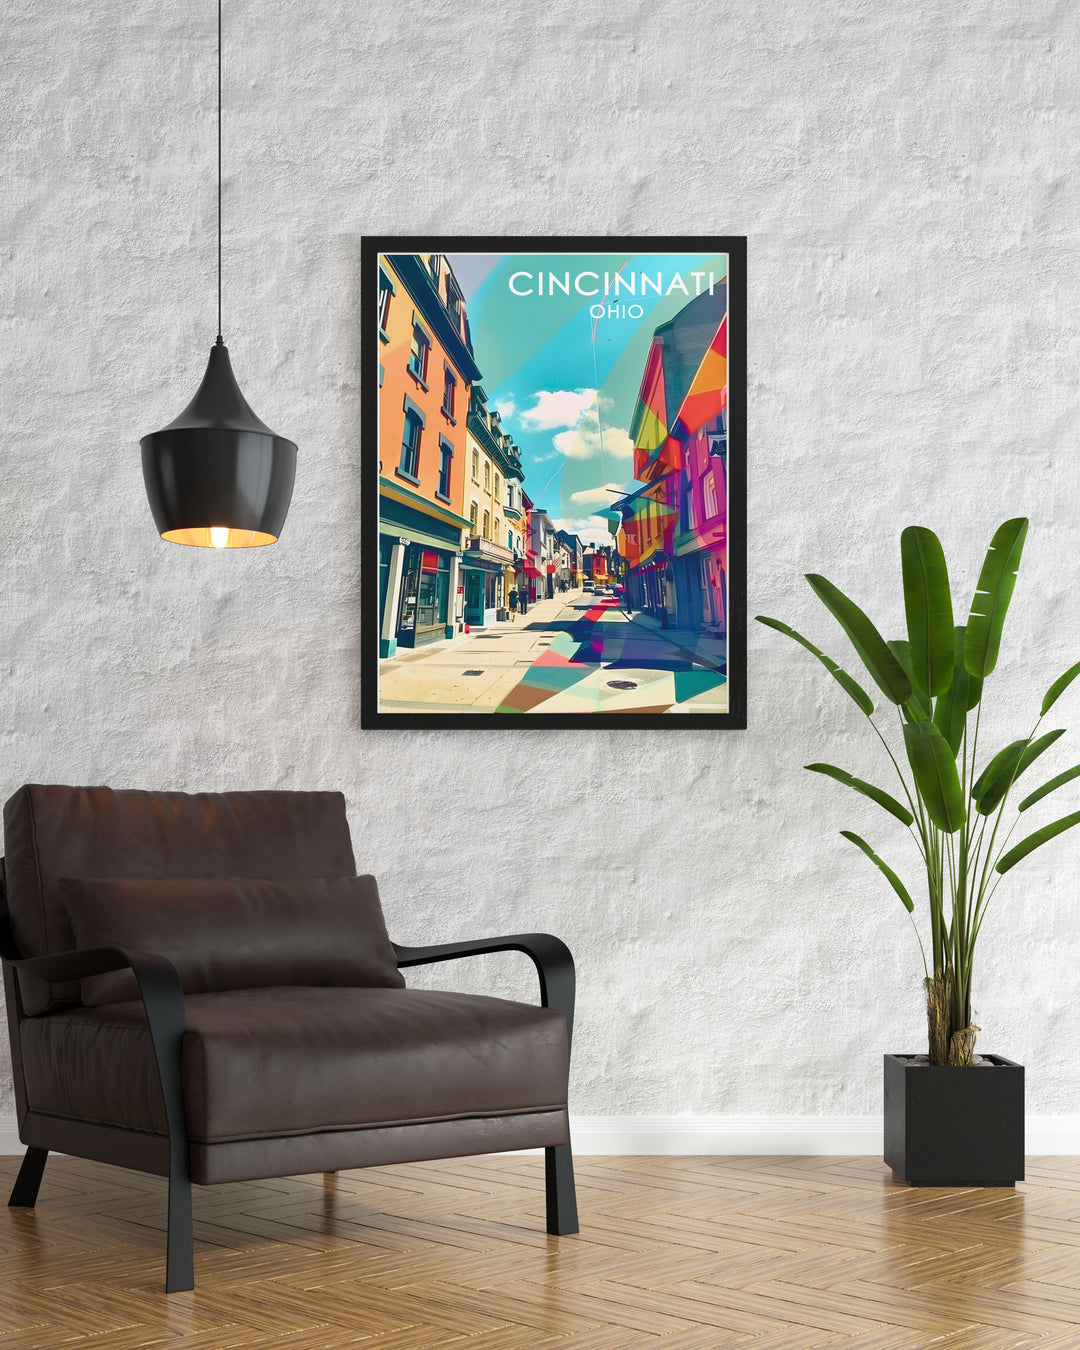 A detailed art print of Findlay Market showcases its colorful stalls and historic architecture. Ideal for any space, this poster celebrates the heart of Cincinnatis community life.